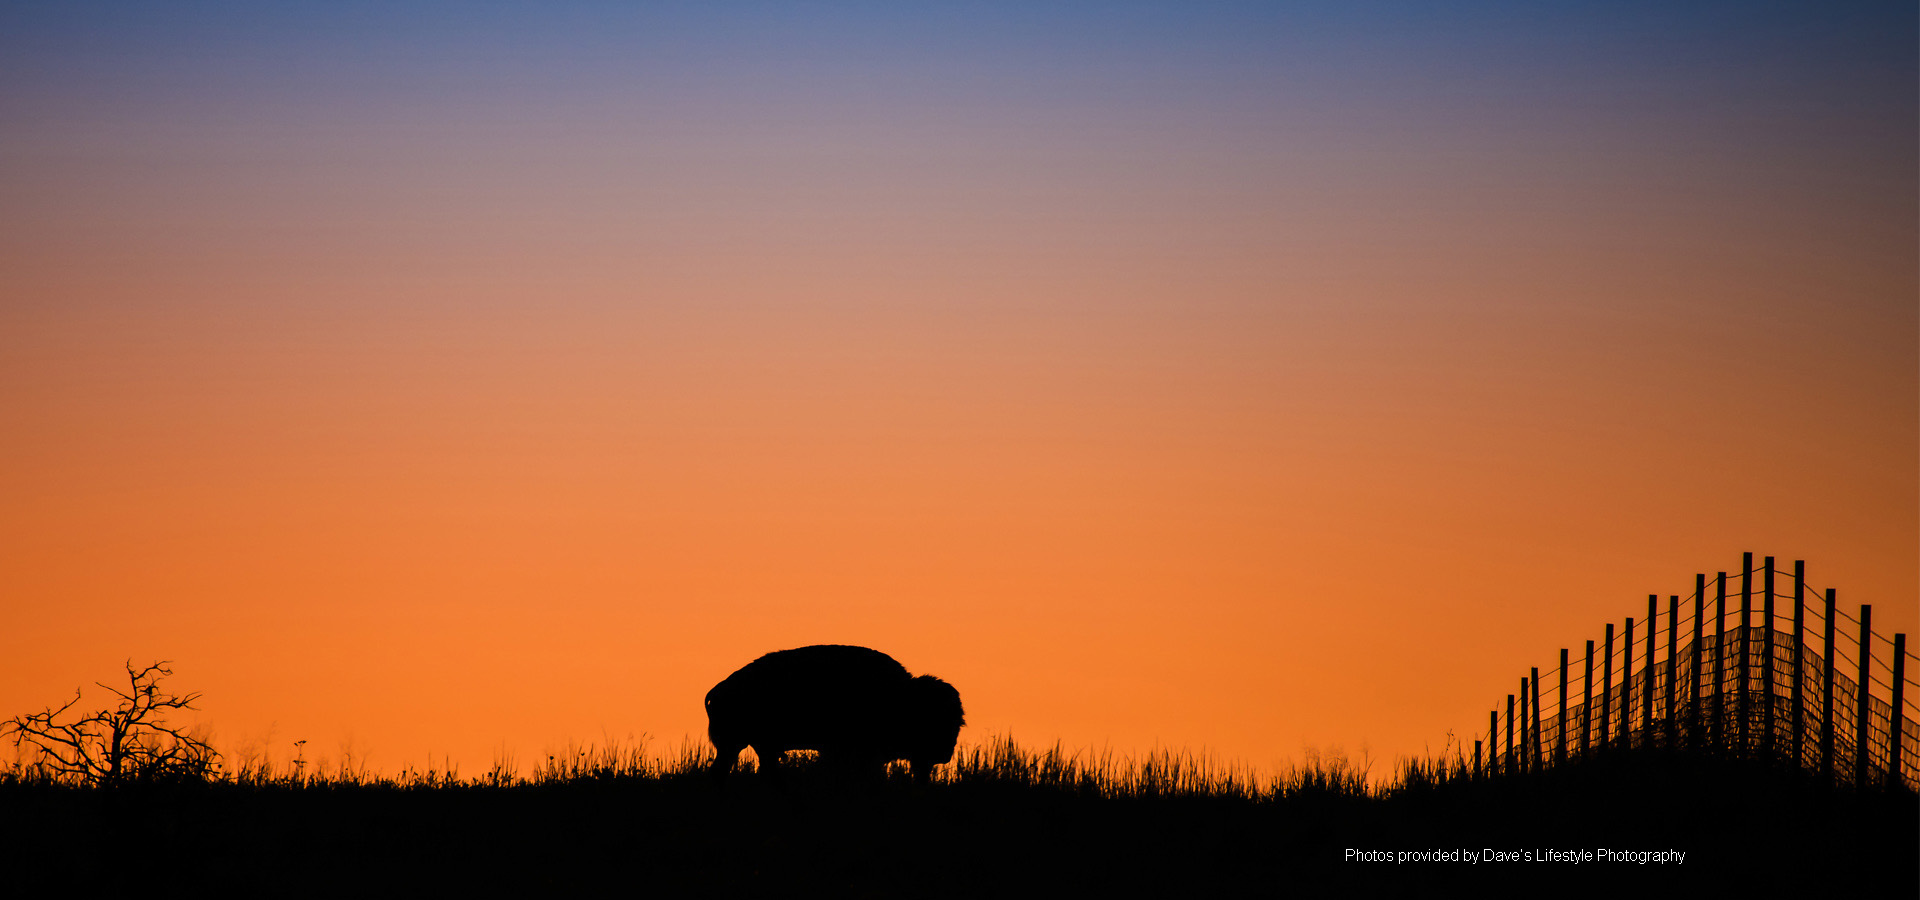 Buffalo Image by Dave's Lifestyle Photography